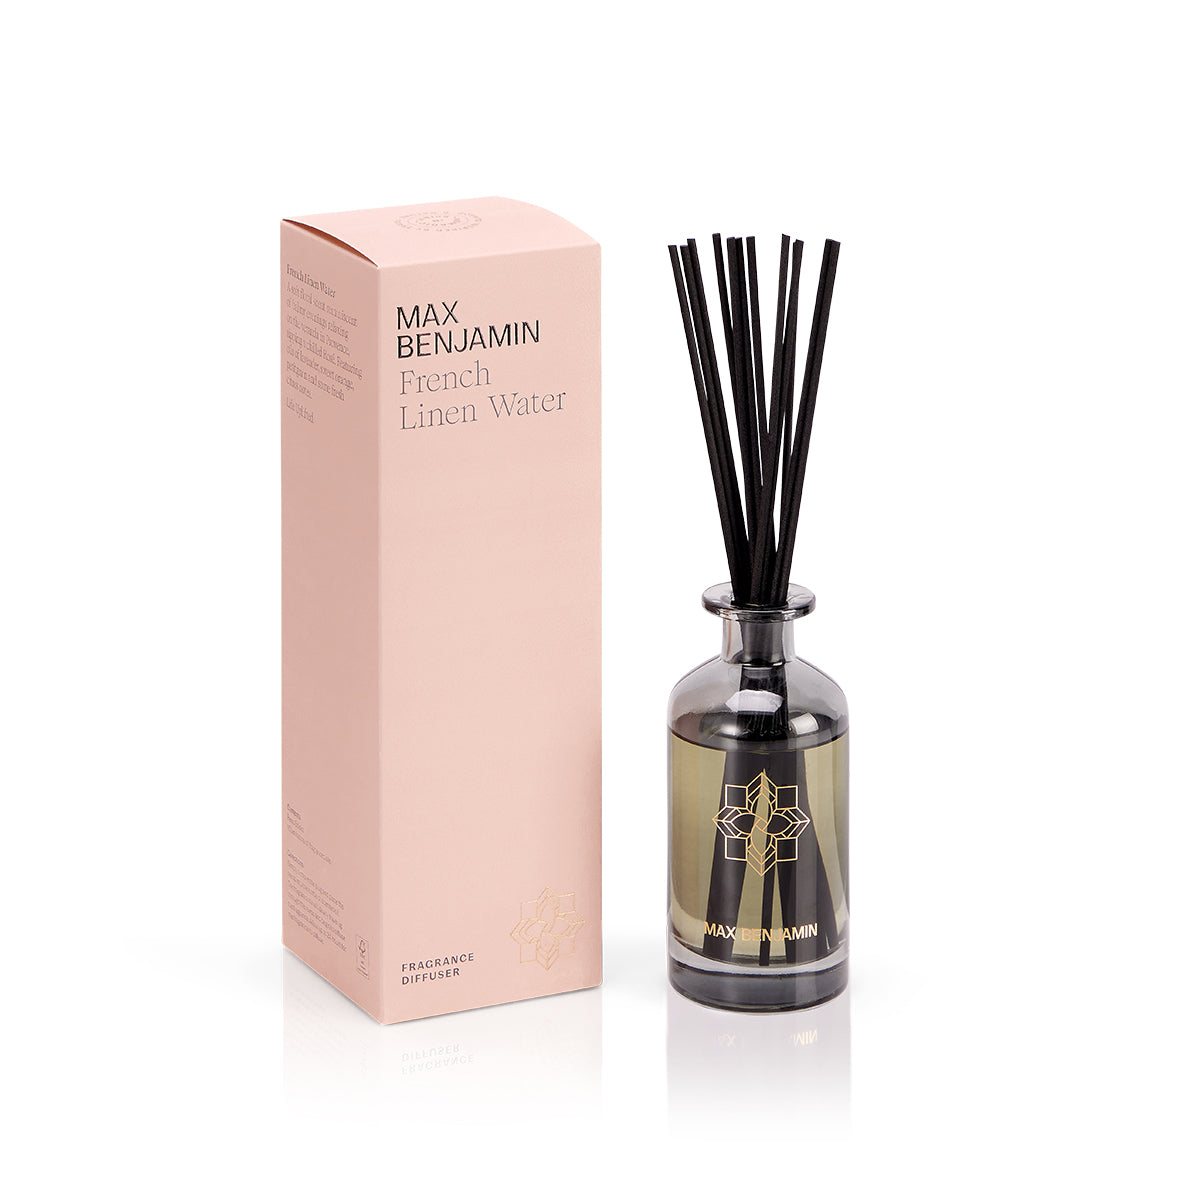 Max Benjamin Reed Diffuser - French Linen Water 150ml